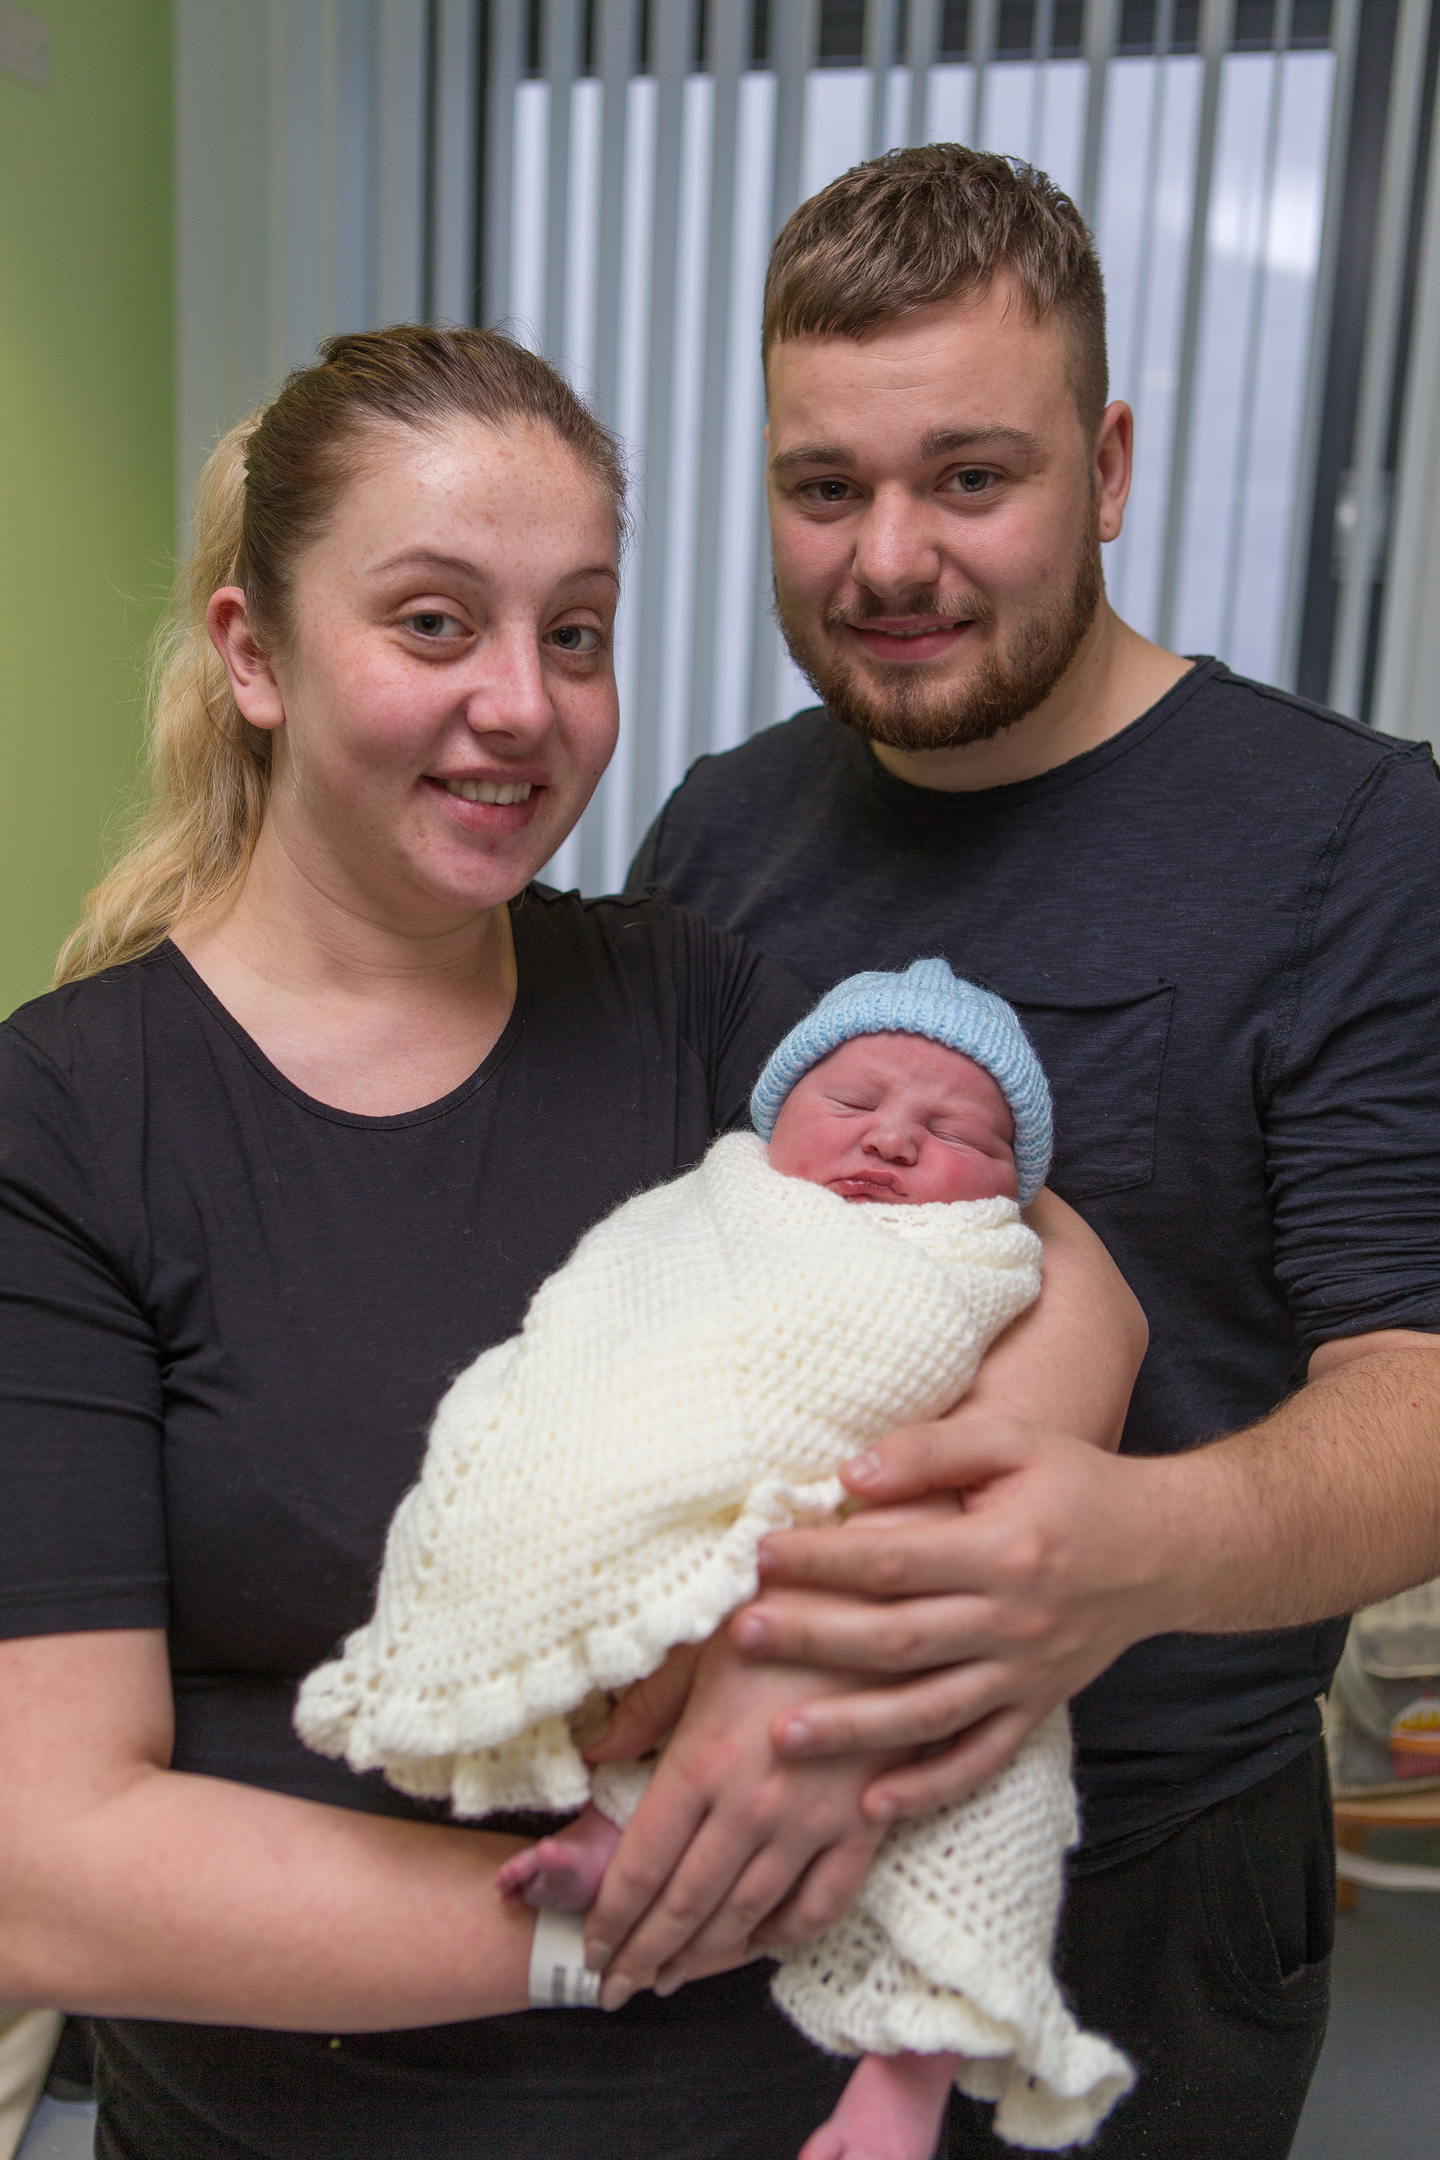 New mum Adele Thomas (23) and new dad Ross Paul (23) from Kirkcaldy with baby boy who has still to be named. 